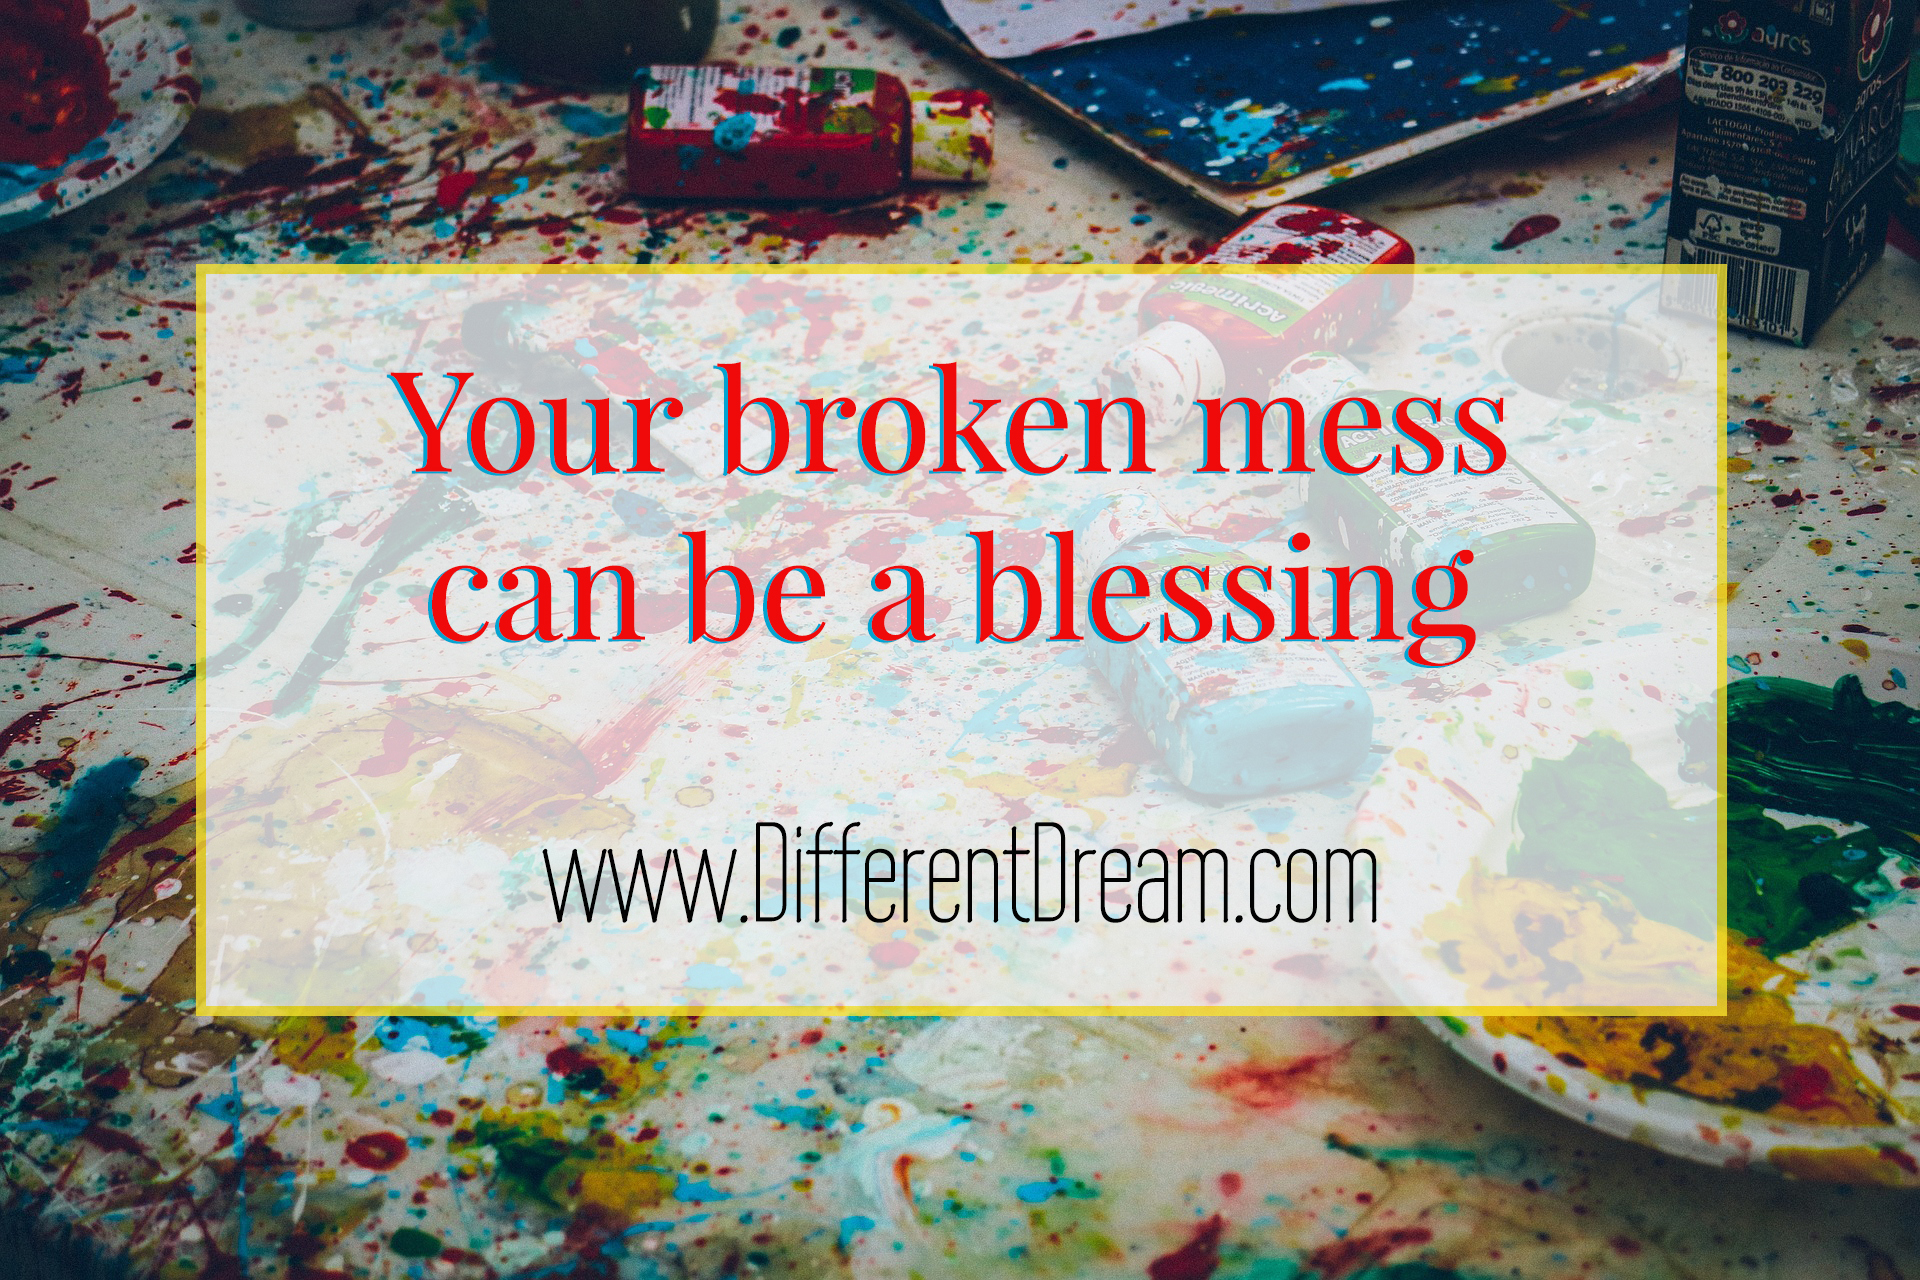 Guest blogger Heather Braucher explains that it's acceptable when your special needs mess is your message.